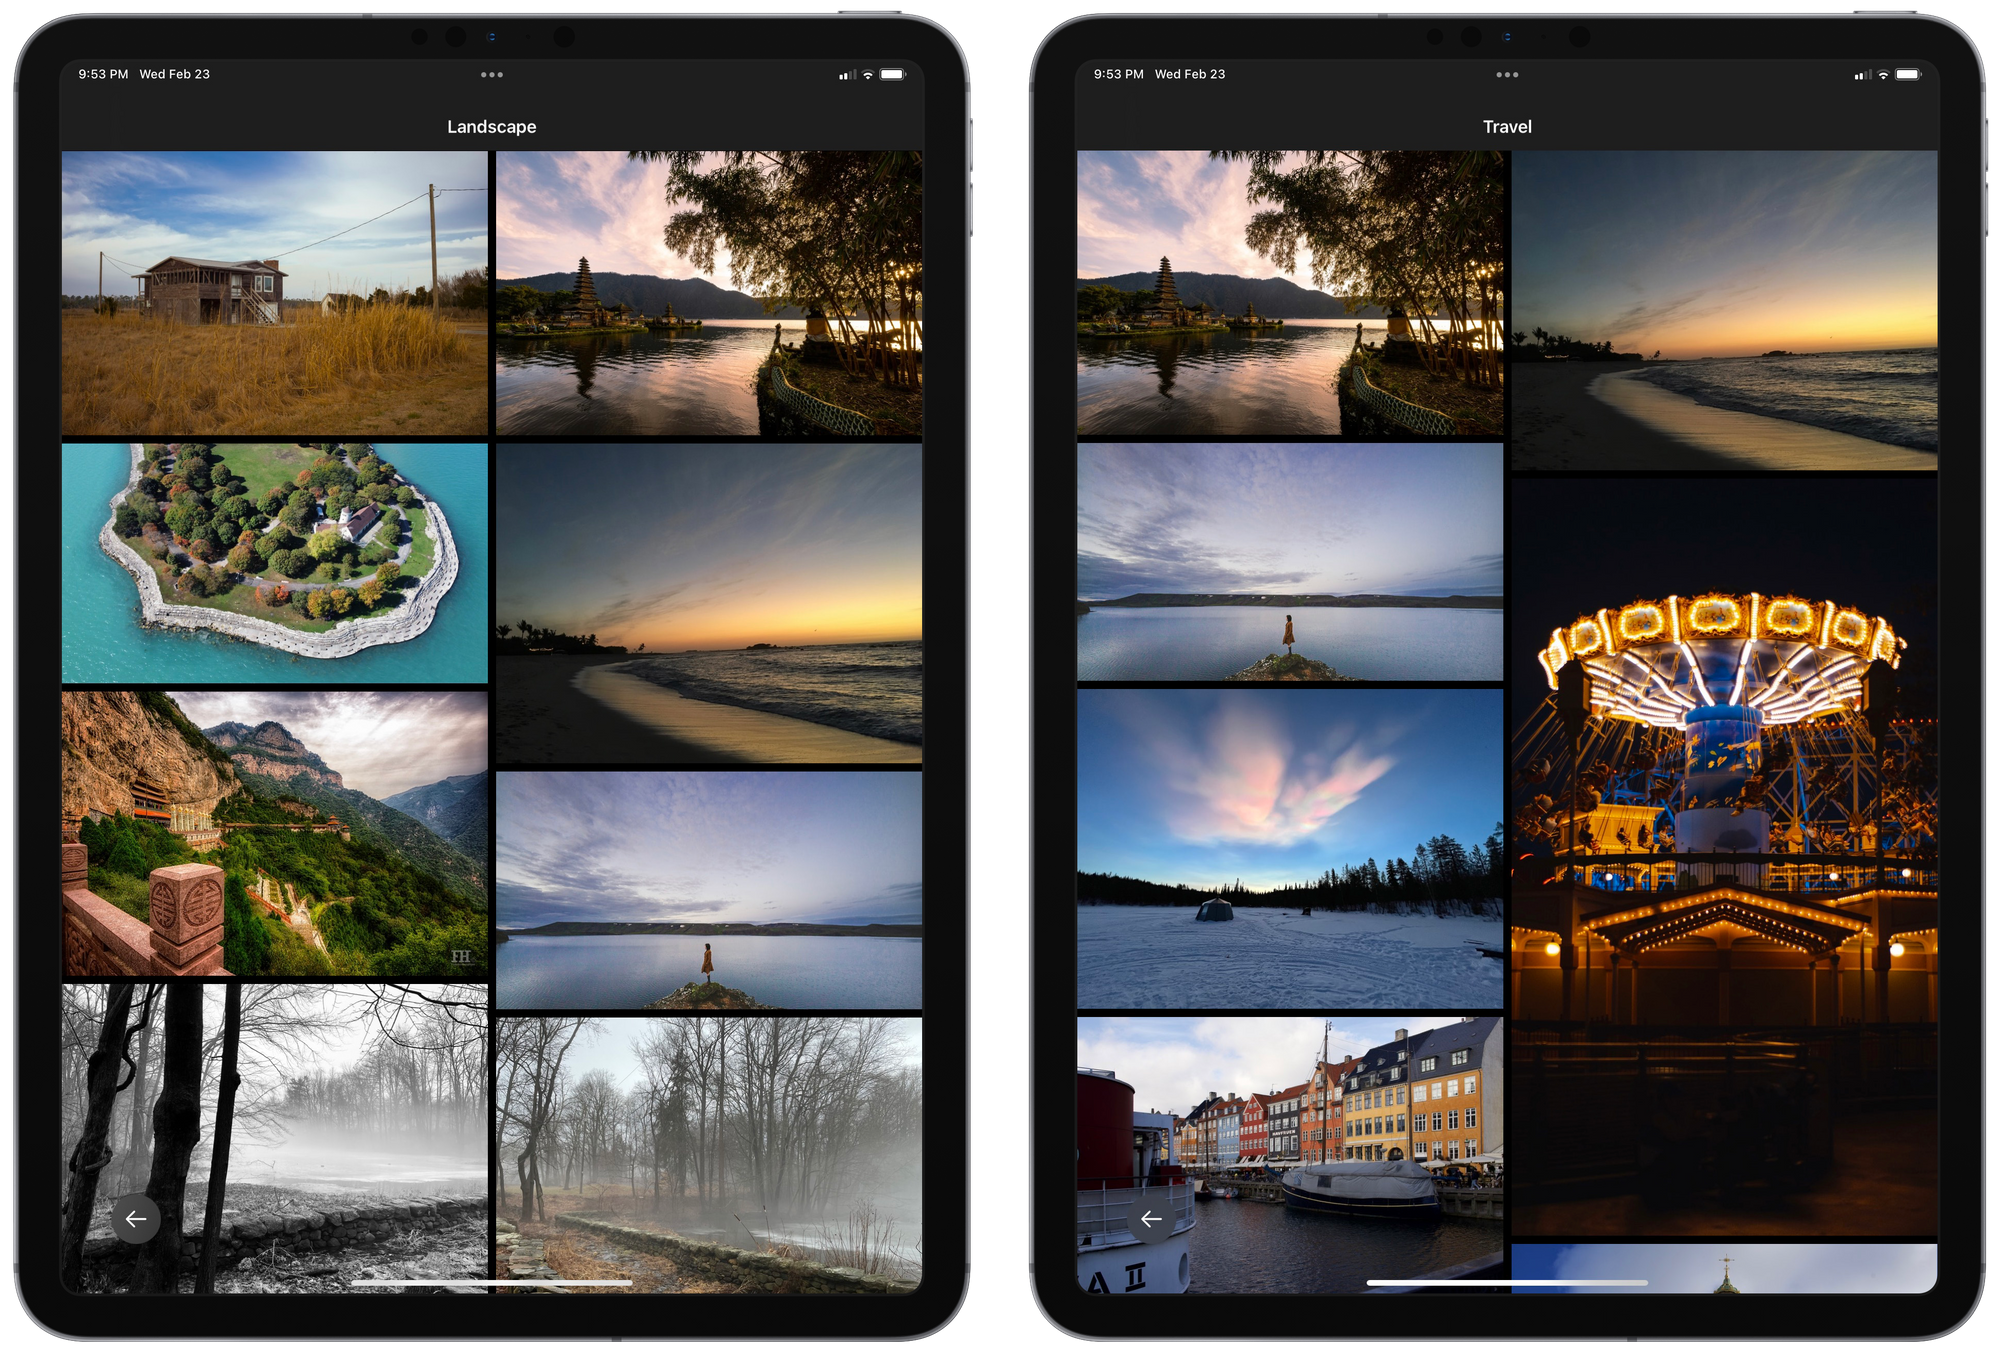 I love the ability to share photos directly from Lightroom on iPad to Glass. This sharing workflow is far superior to anything Instagram has ever developed.